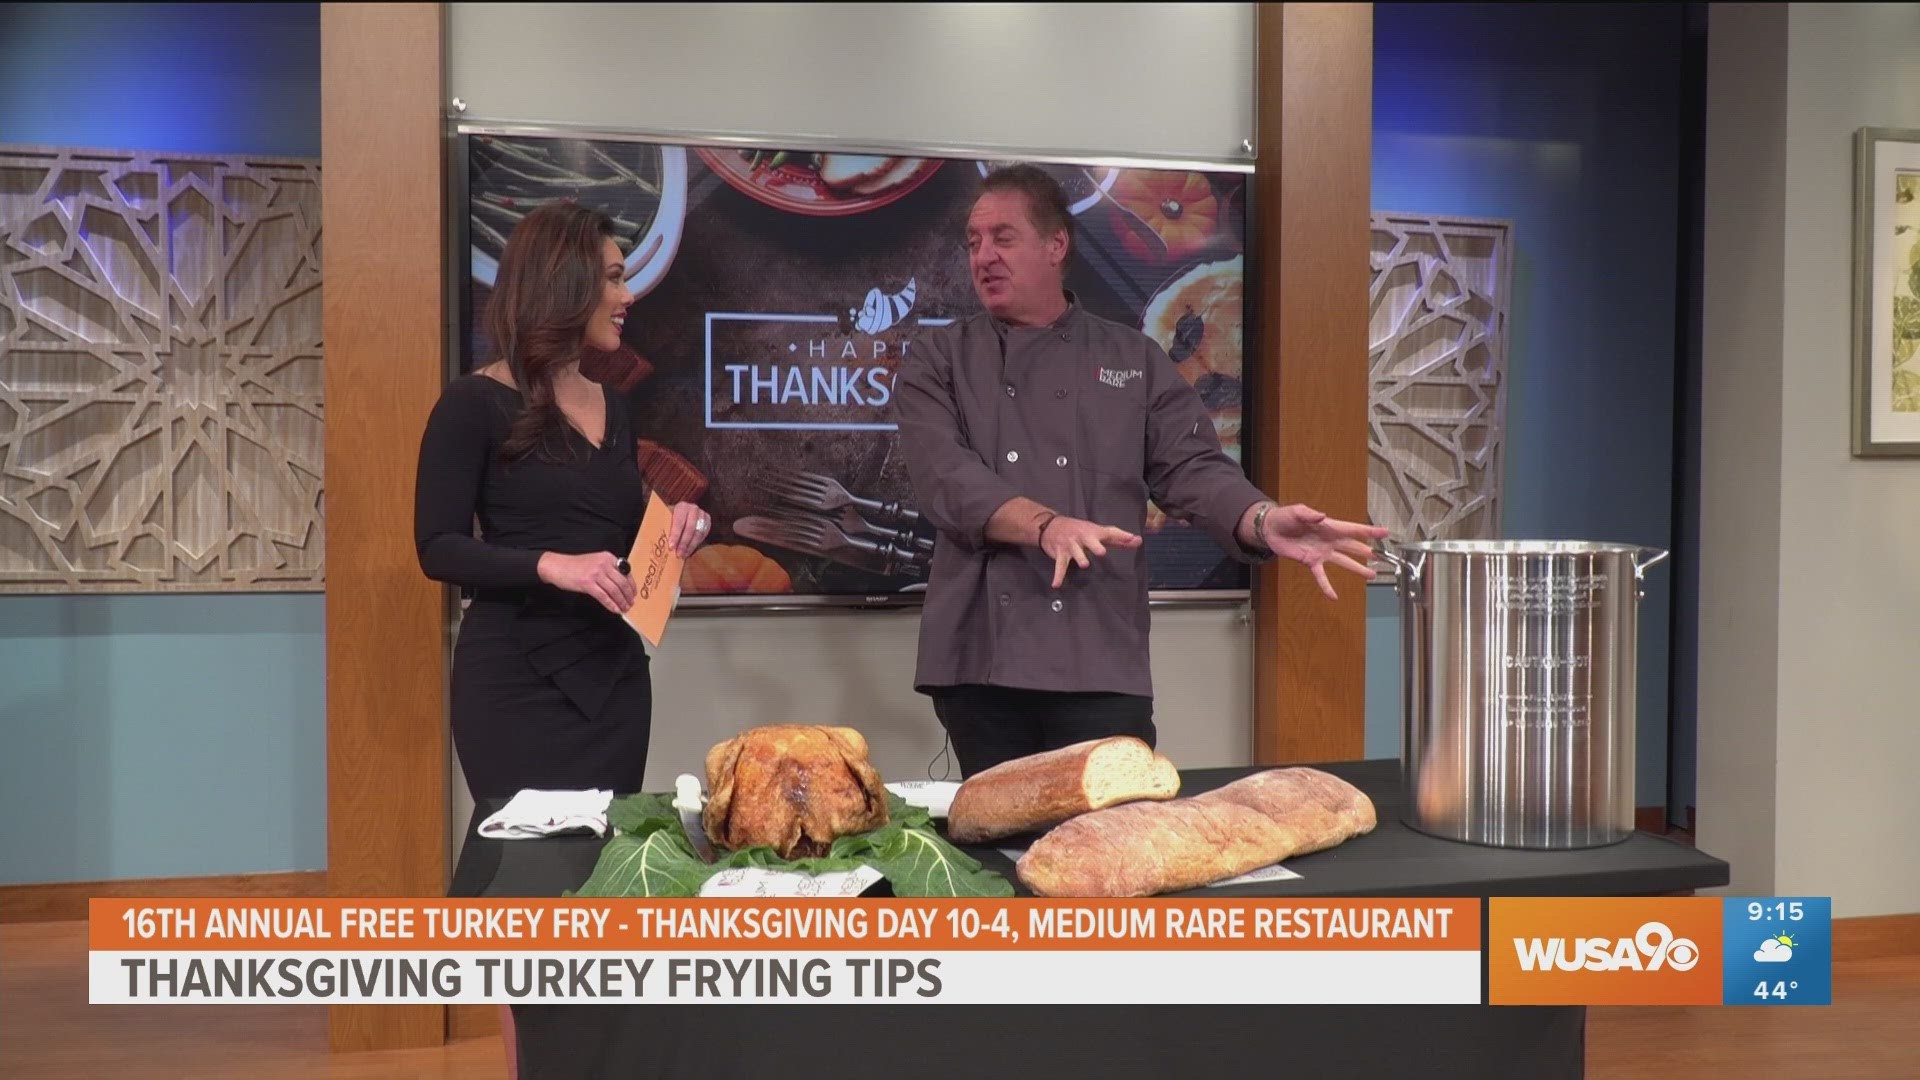 Mark Bucher of Medium Rare Restaurant in DC explains how to successfully fry a turkey and invites everyone to the 16th annual turkey fry this Thanksgiving Day.